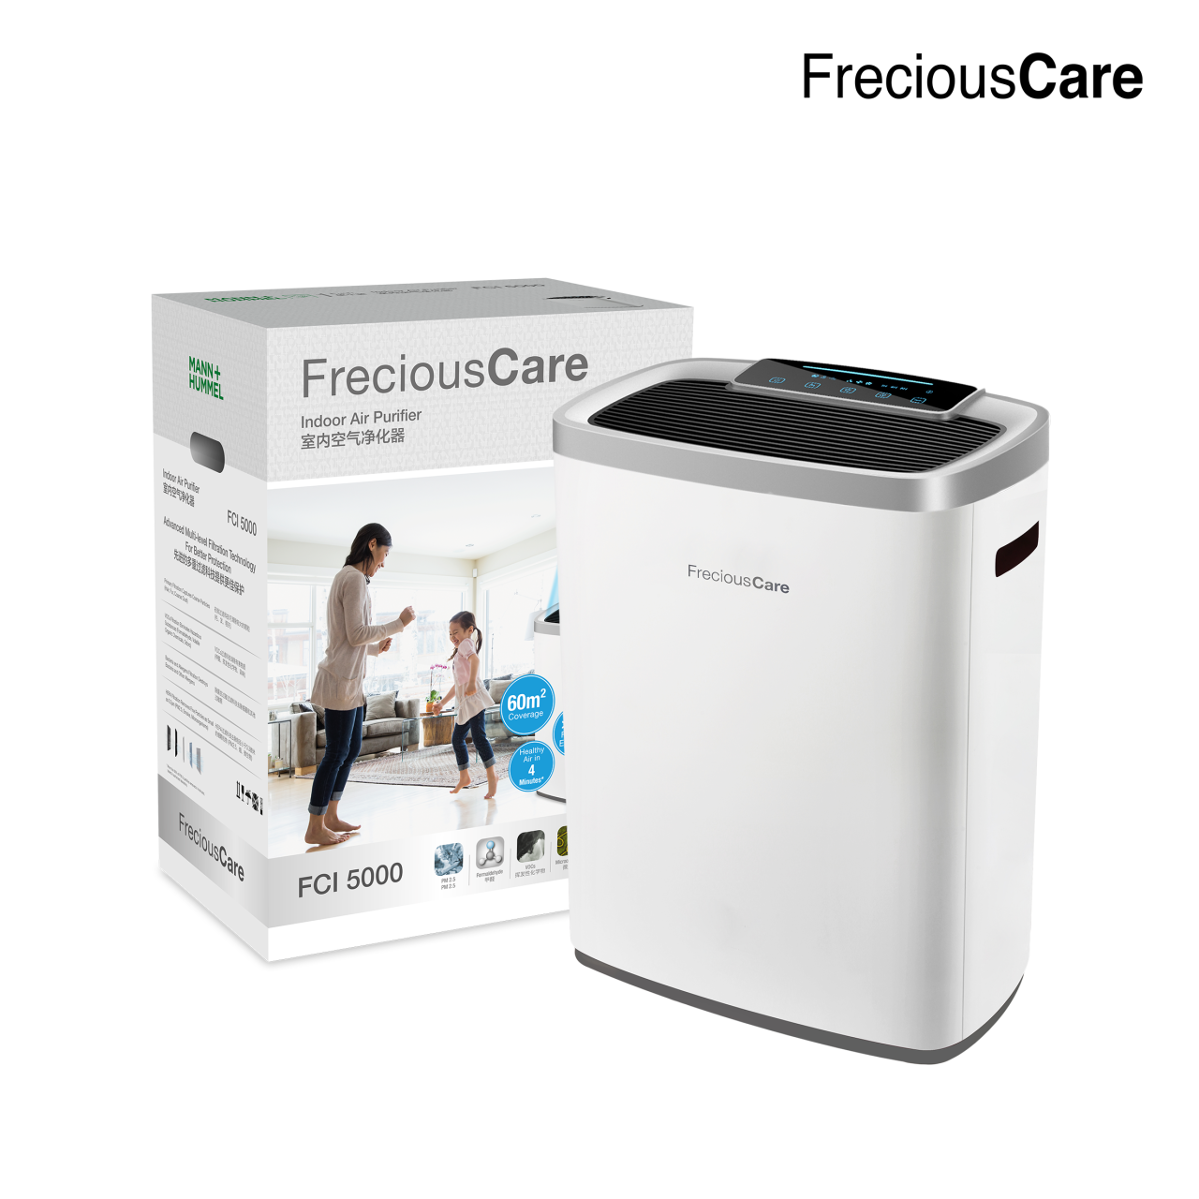  FreciousCare Indoor Air Purifier (FCI 5000)